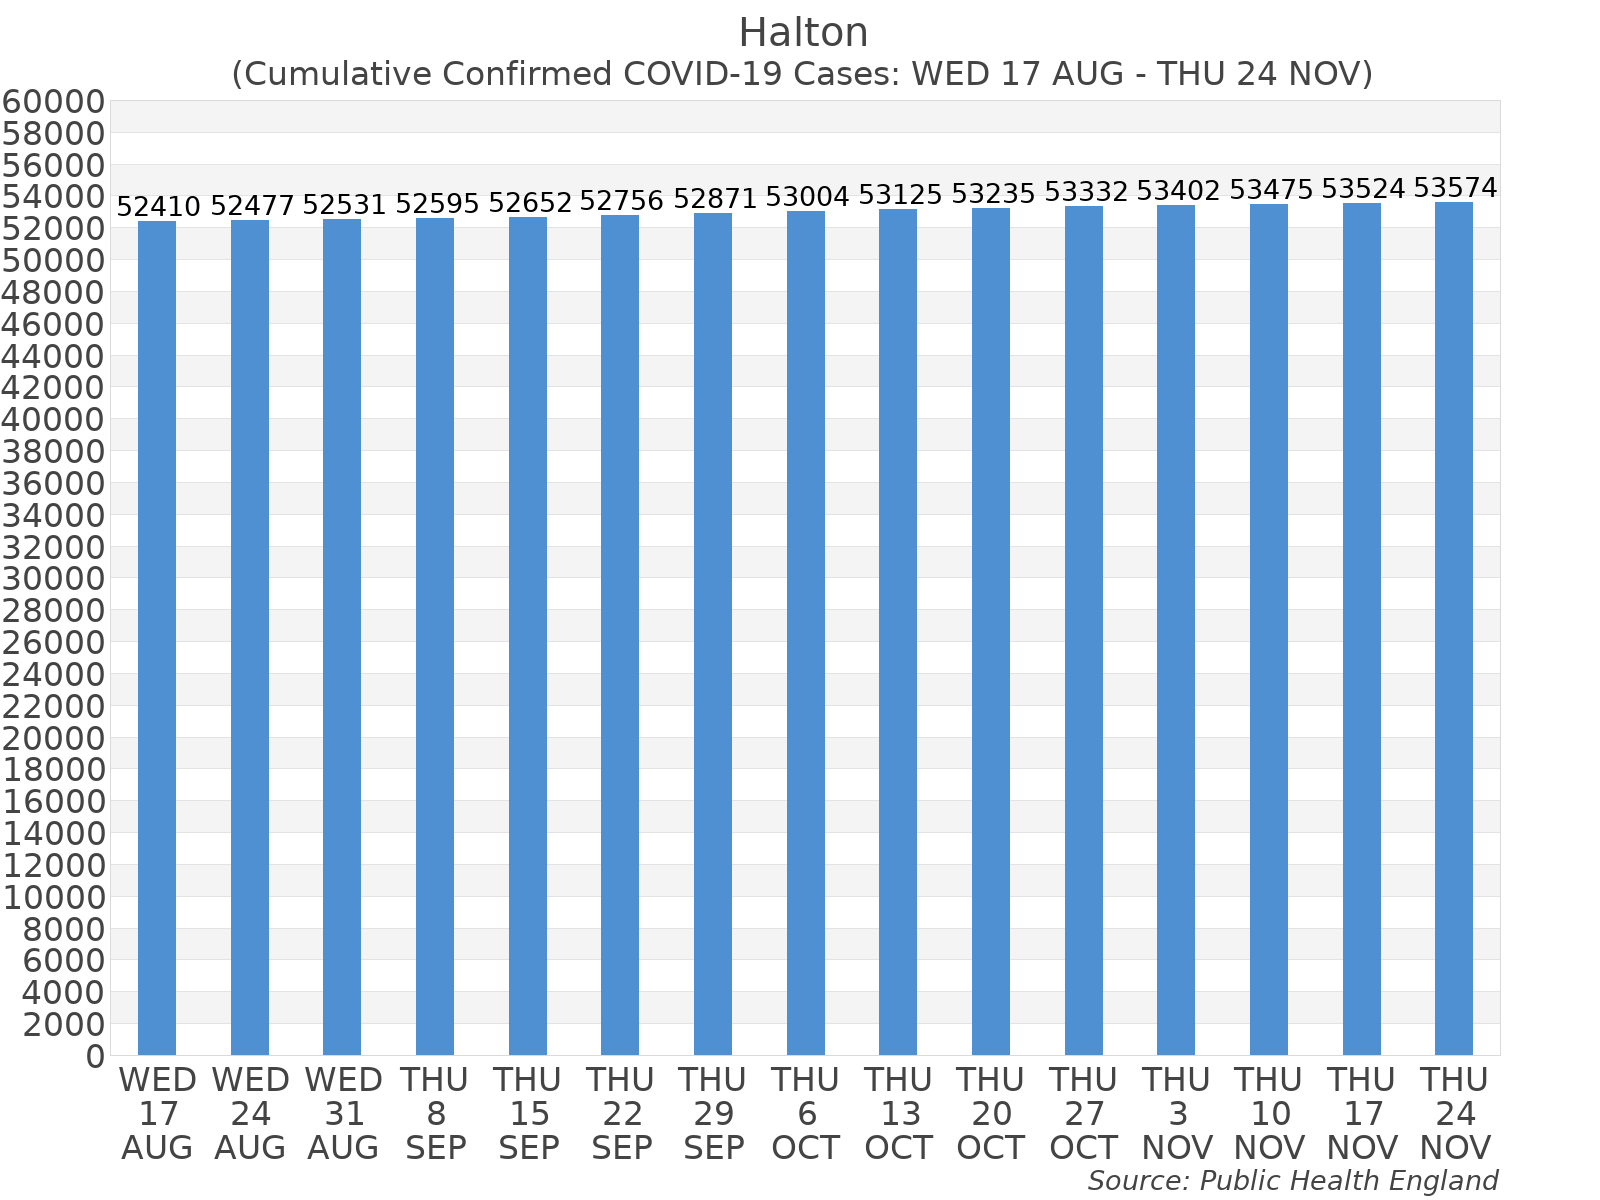 Graph tracking the number of confirmed coronavirus (COVID-19) cases where the patient lives within the Halton Upper Tier Local Authority Area.